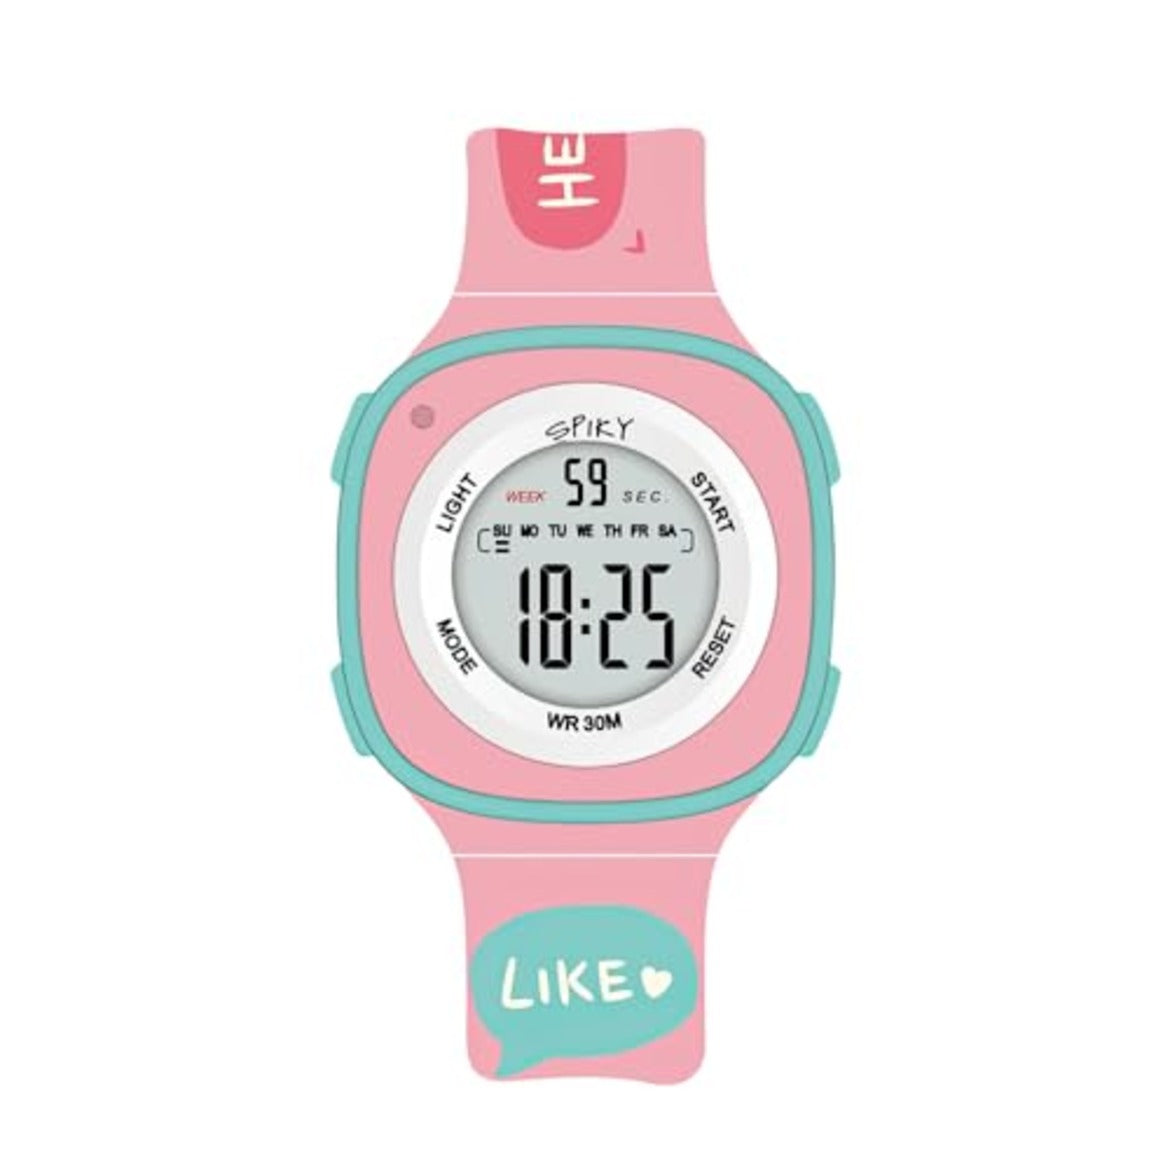 Spiky Square Digital Kids Sports Watches Combo - Pink & Blue